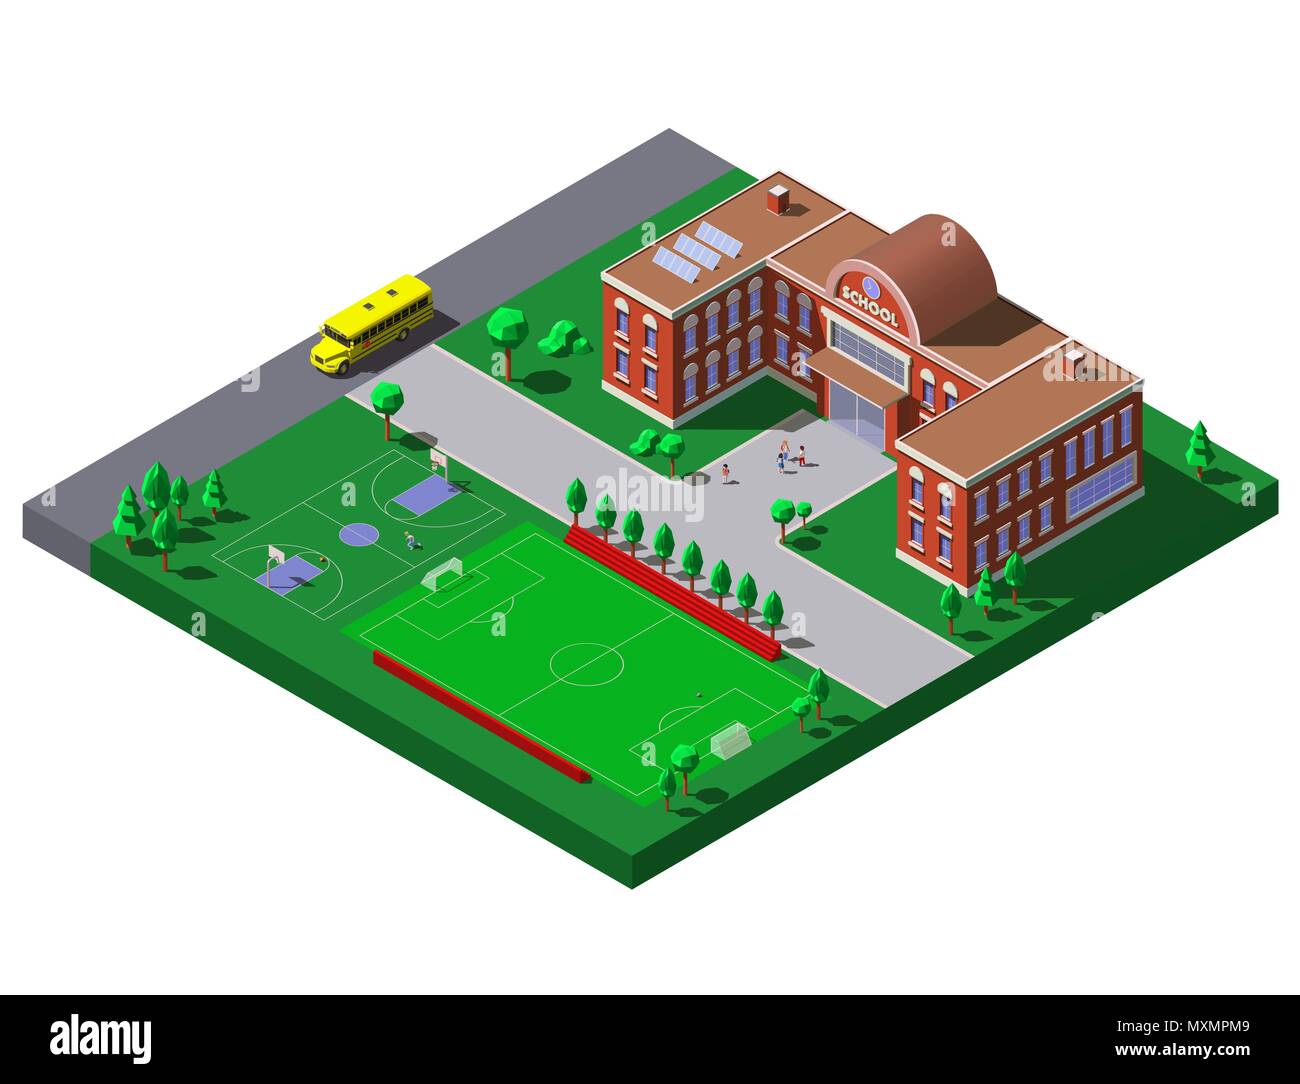 School building with soccer, tennis field and school bus. Vector isometric illustration. Stock Vector